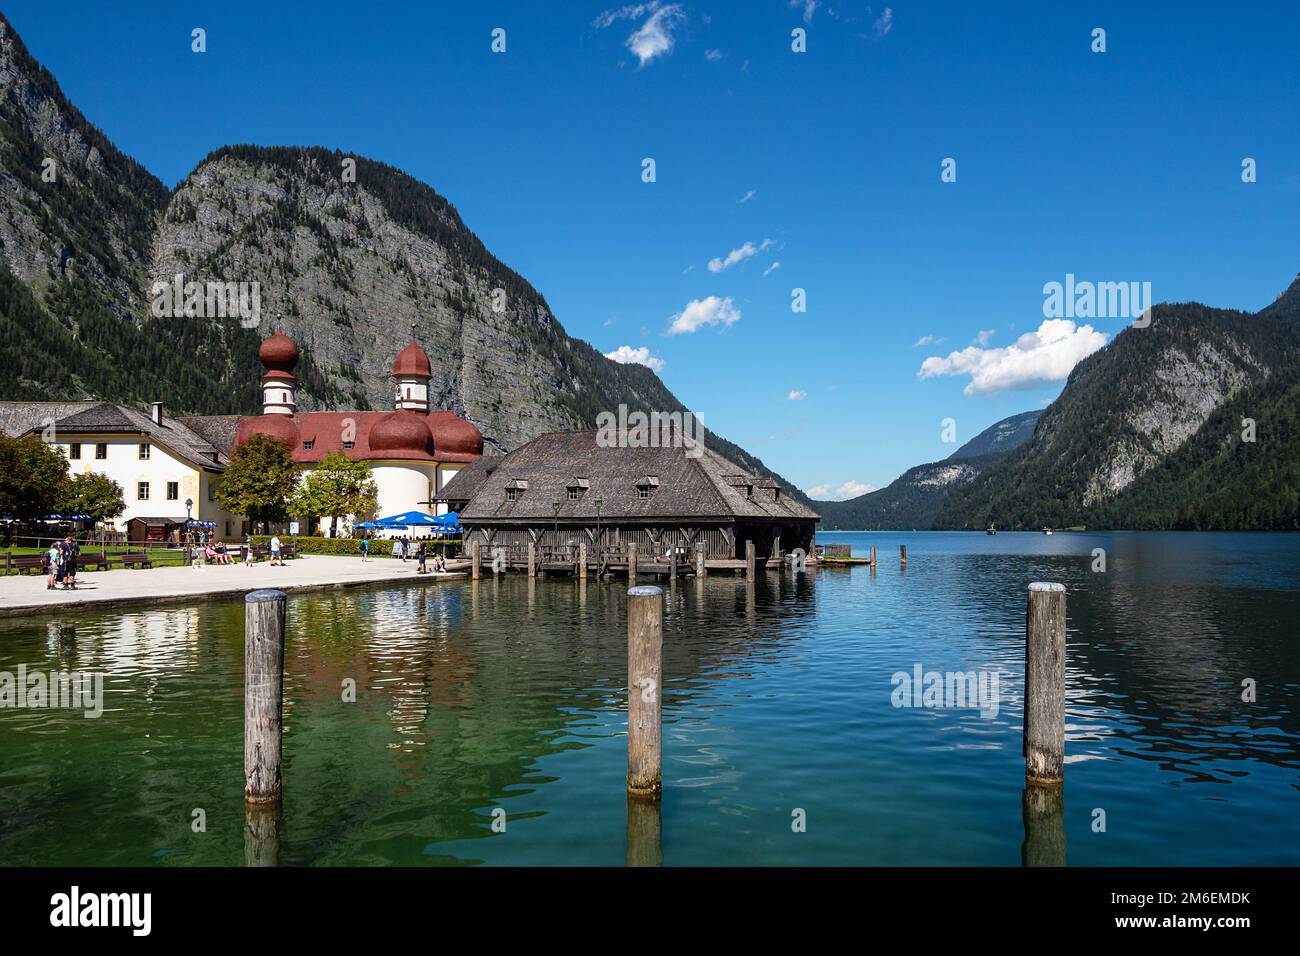 View Of The Königssee In The Berchtesgadener Land. Stock Photo